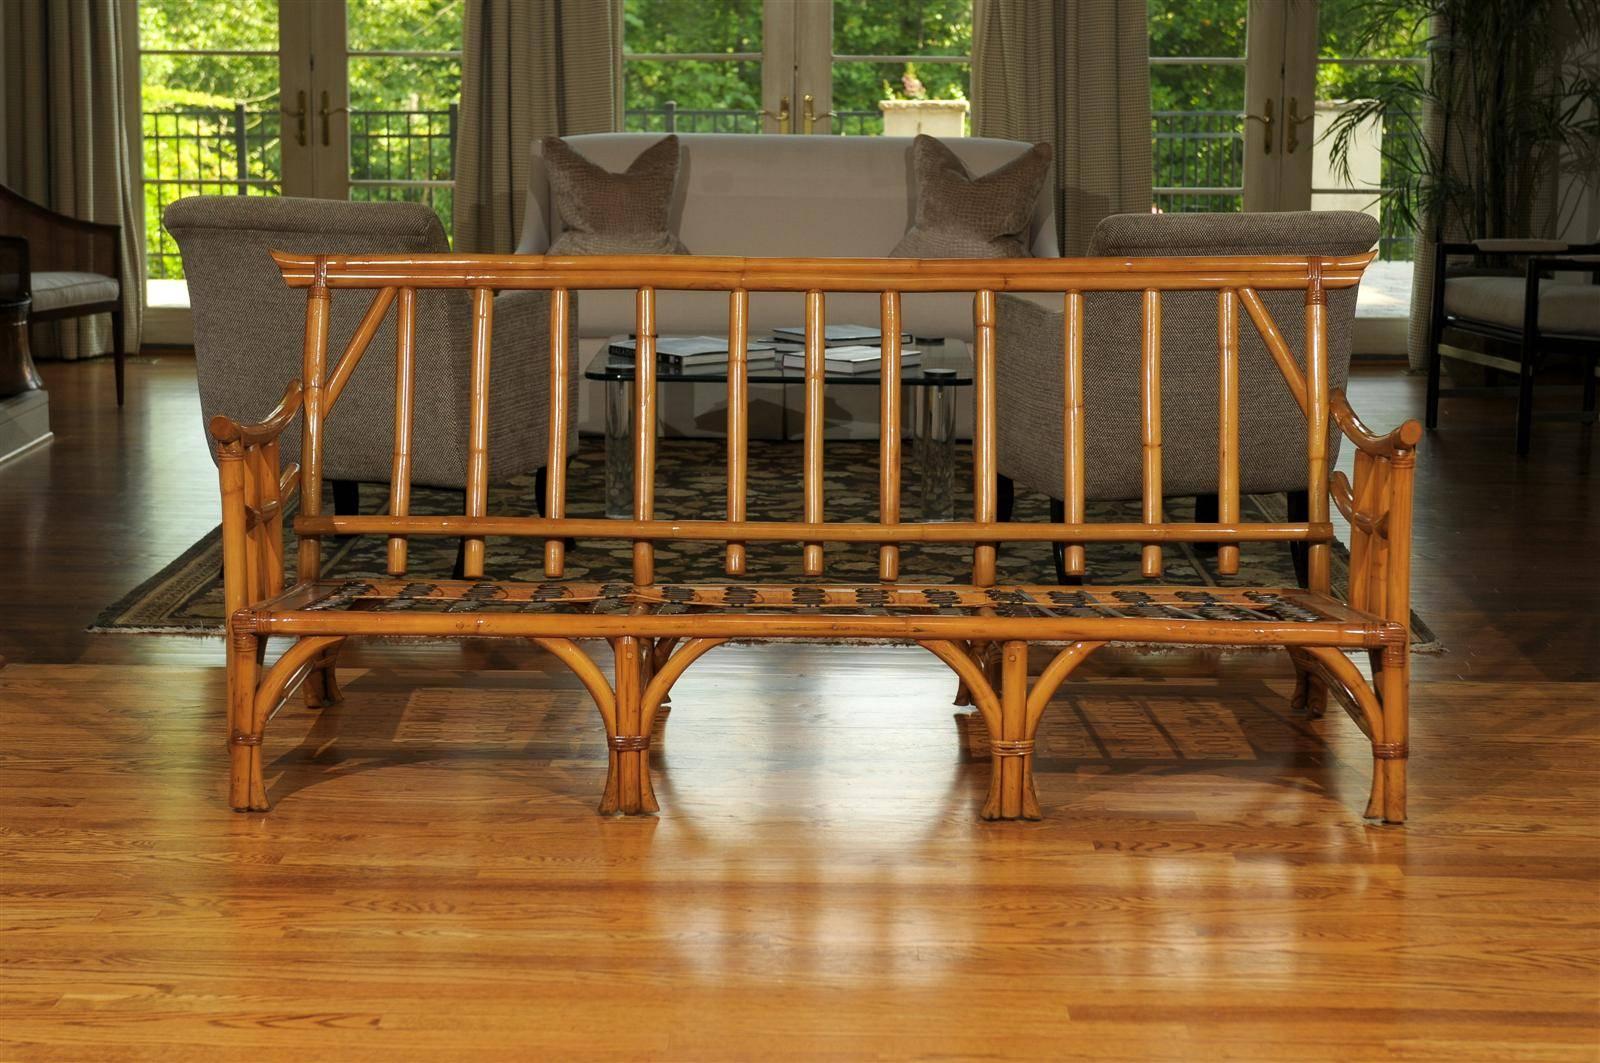 An exceptionally rare sofa by the Calif-Asia Company, circa 1960. Coveted one piece frame. Beautifully crafted rattan and hardwood construction with fabulous style and attention to detail. Stout, sturdy and suitable for heavy regular use. This firm